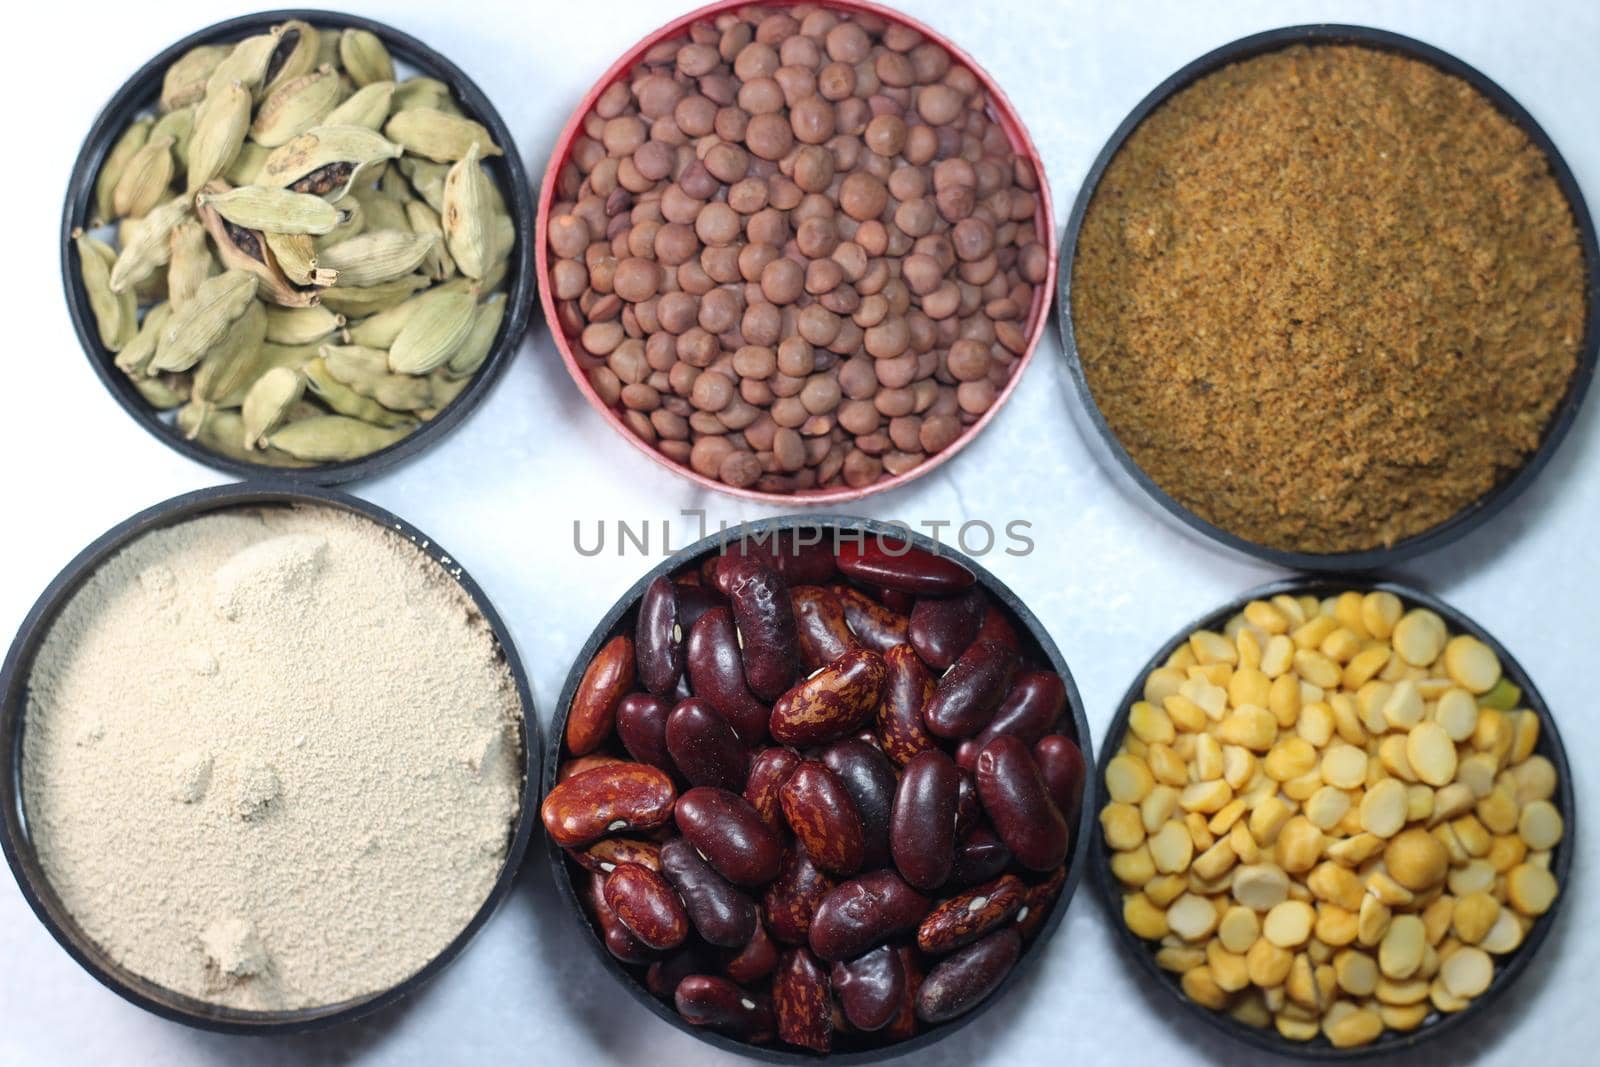 Cereals and spices on white background with copy space by Photochowk